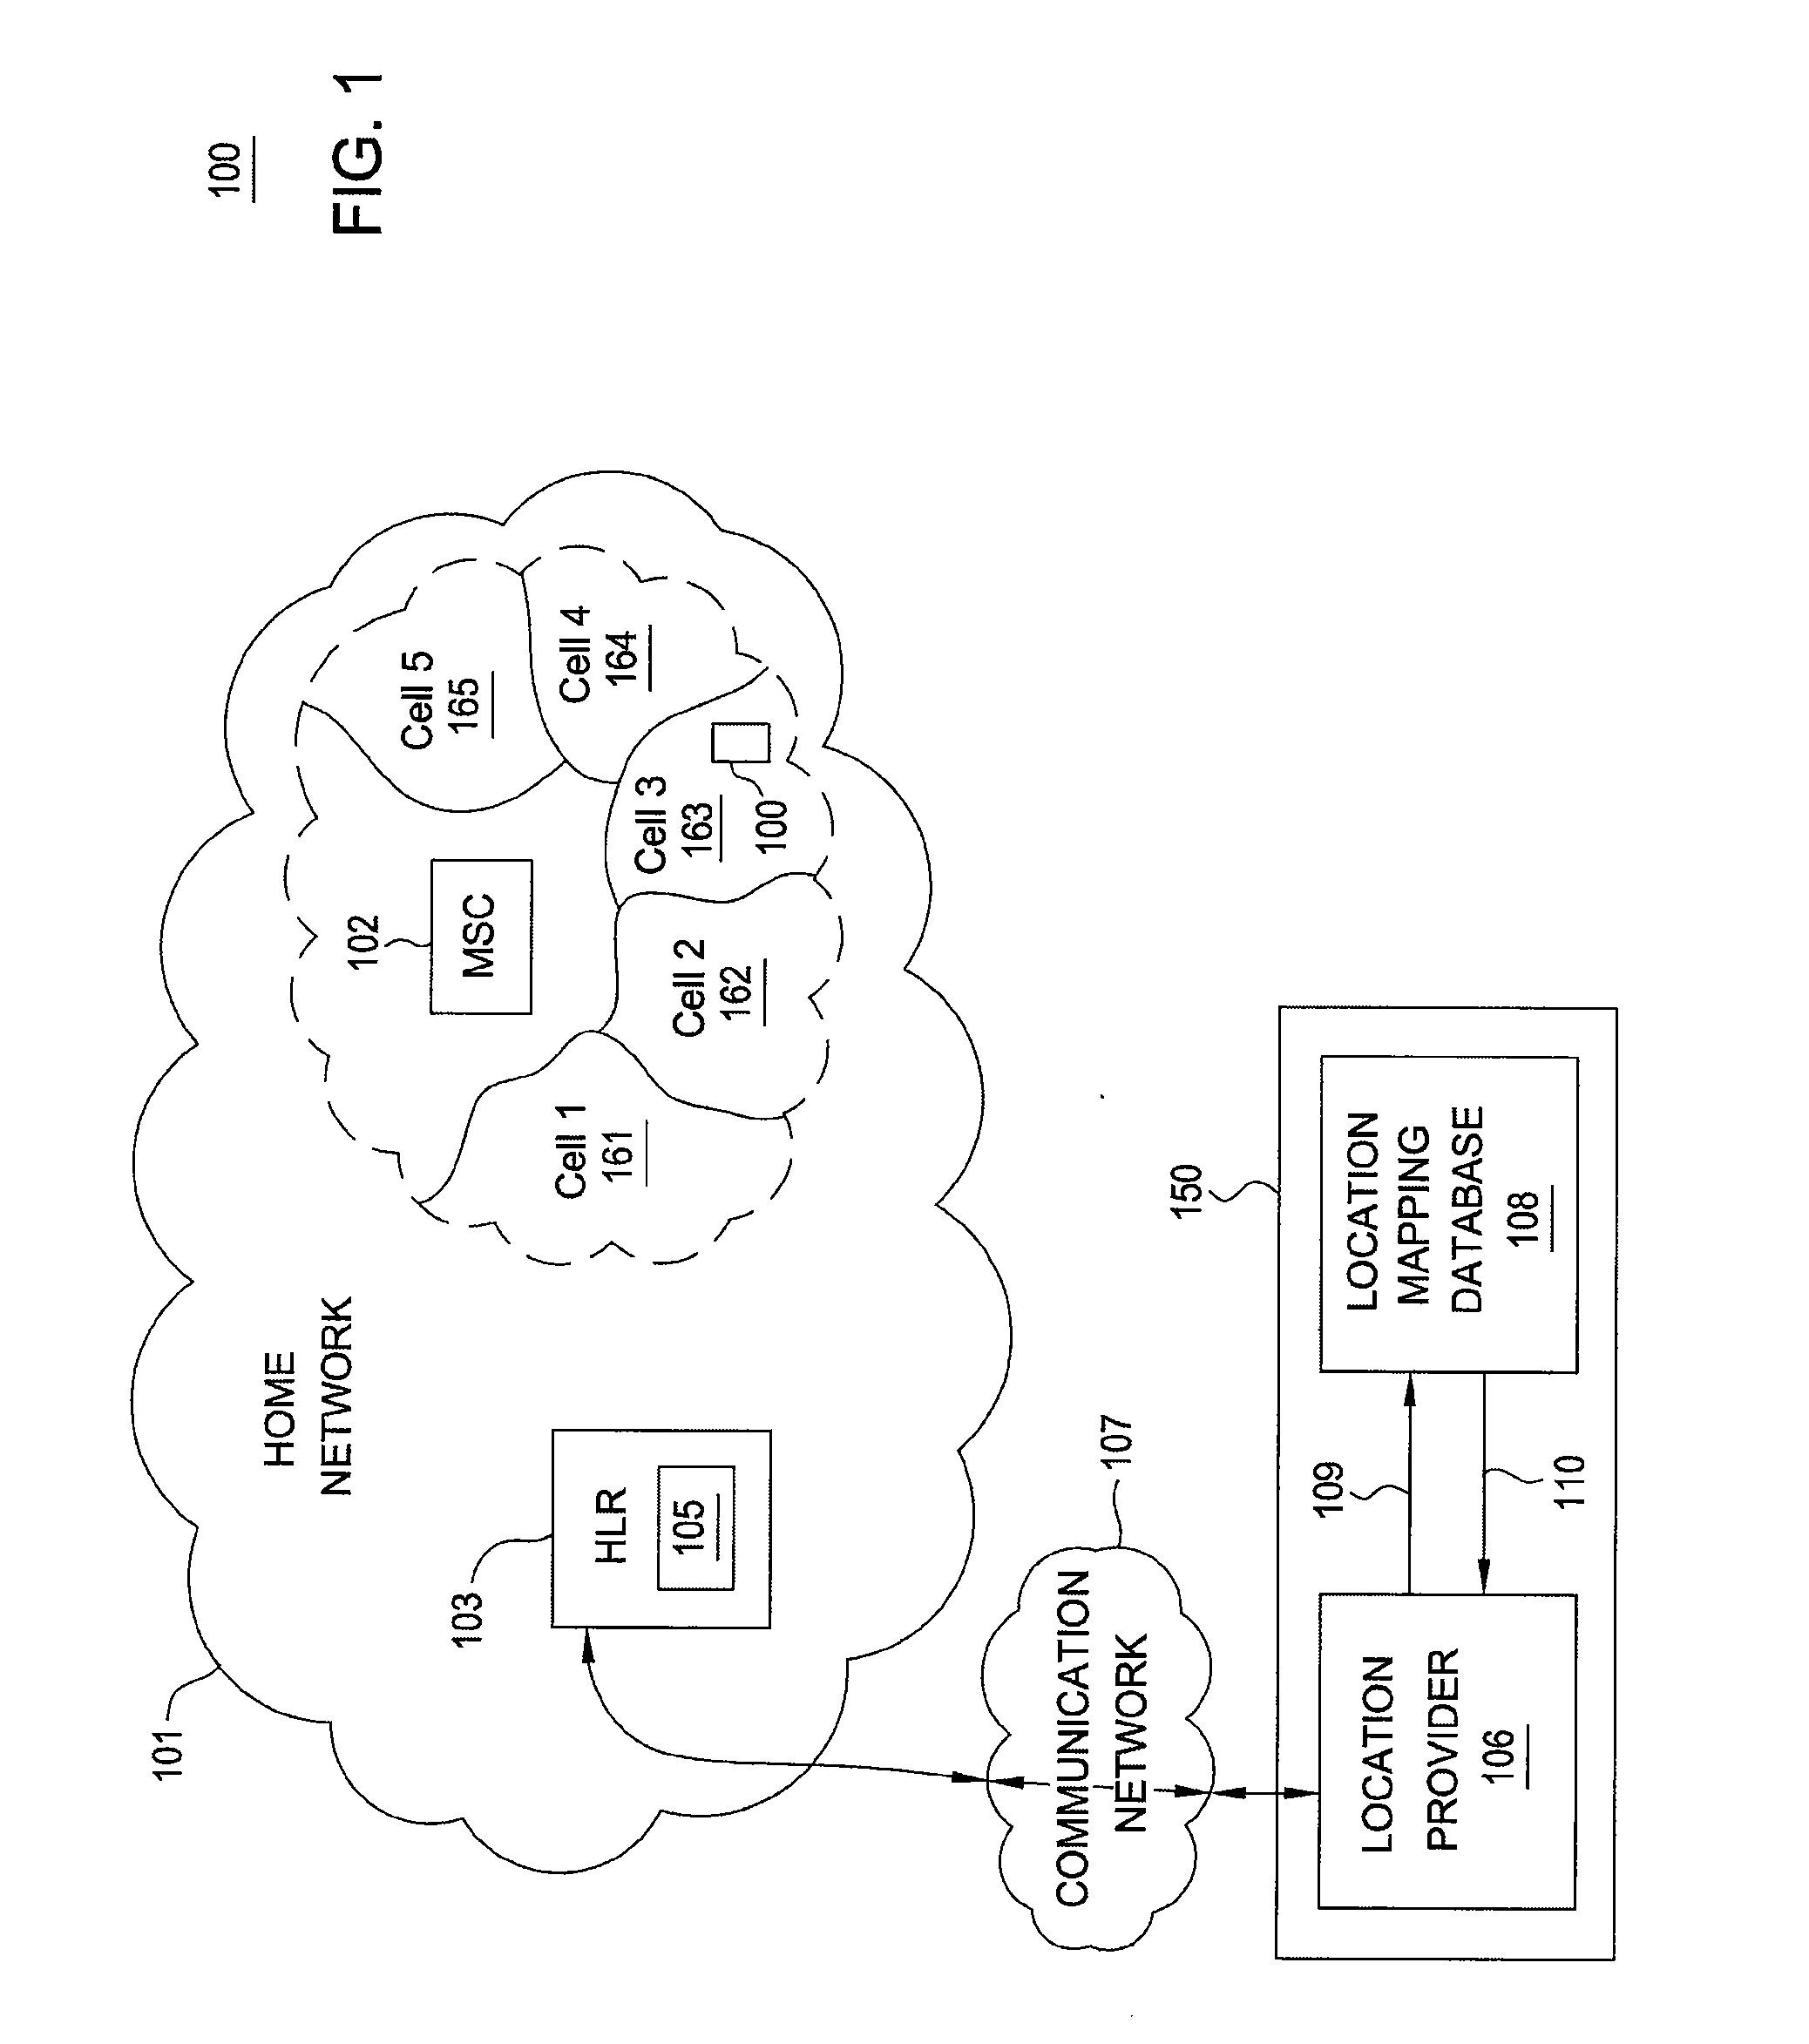 System and method for credit card transaction approval based on mobile subscriber terminal location